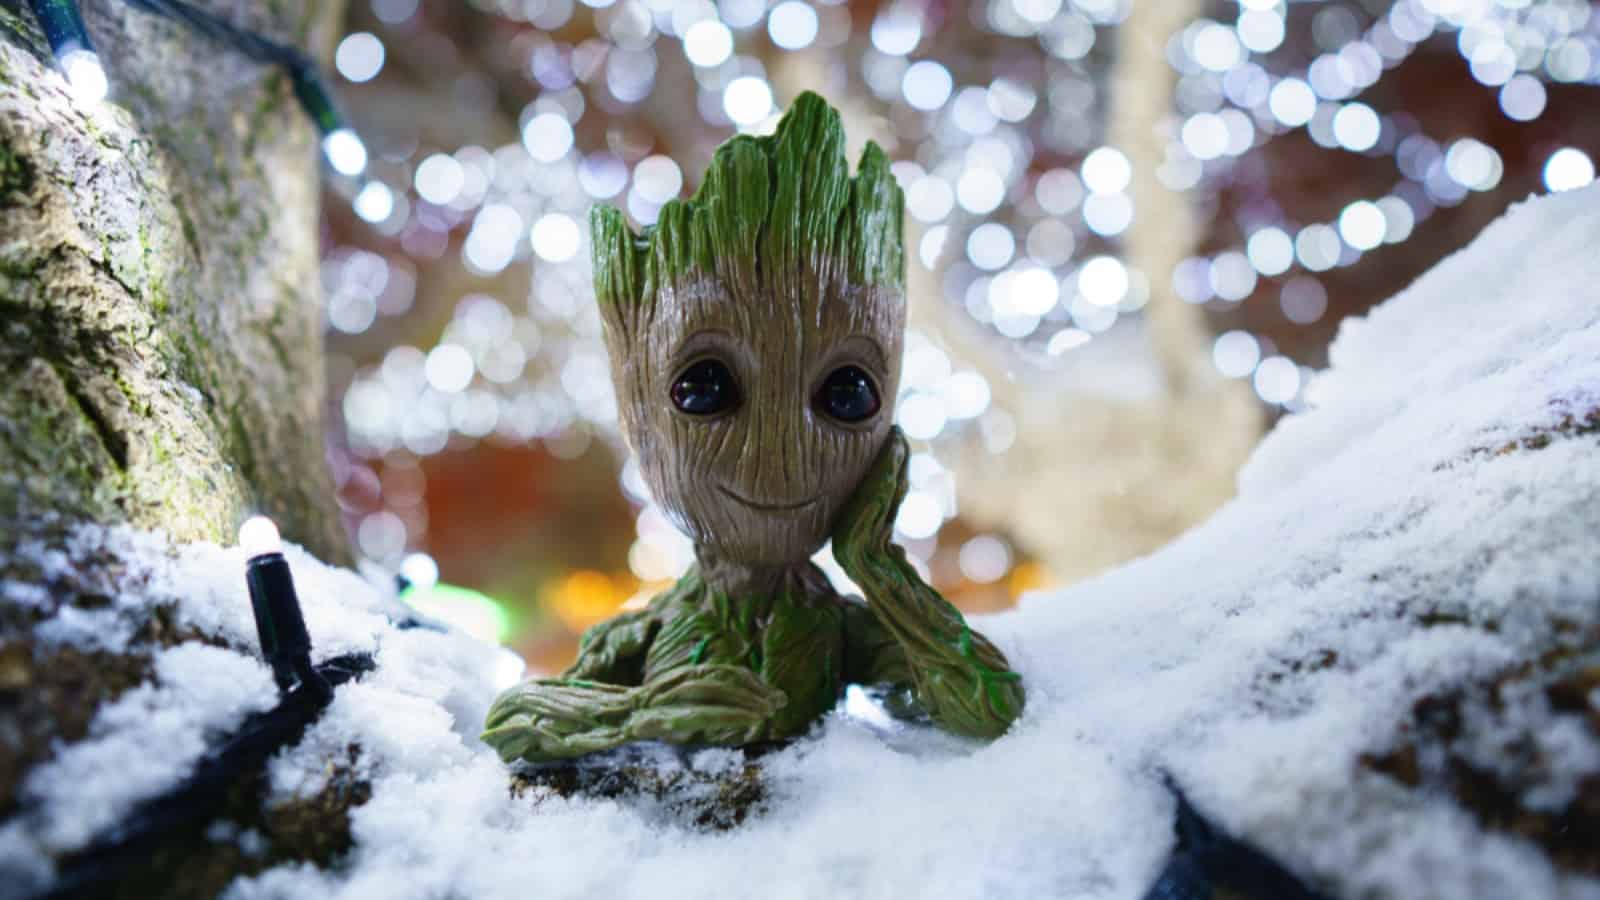 Guardians of The Galaxy vol. 2 Baby Groot figure. Nice bokeh background.